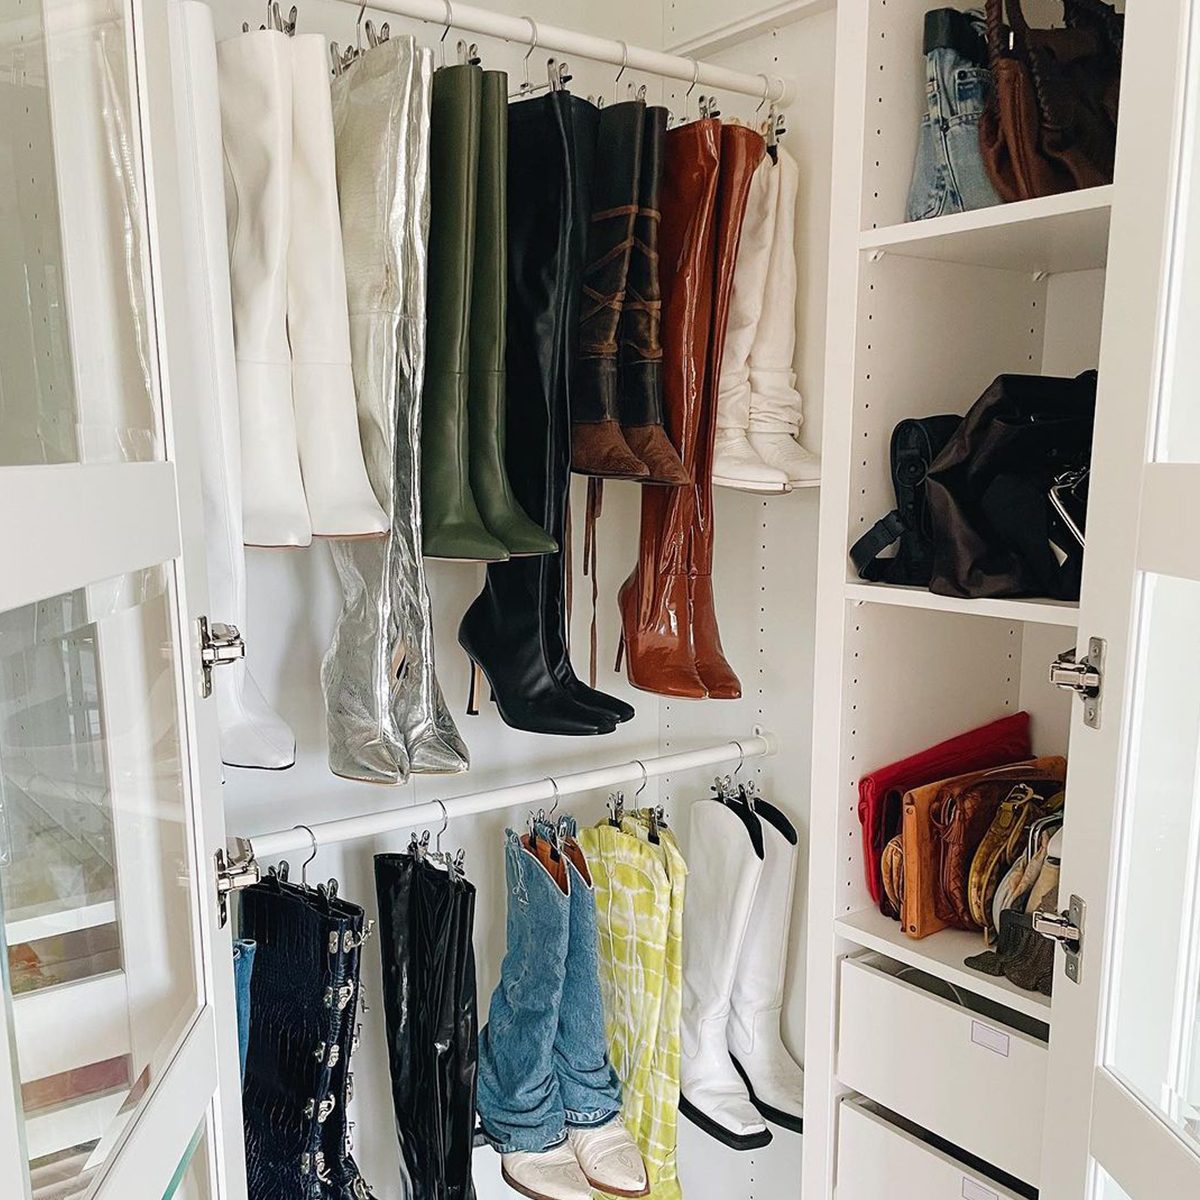 10 Bedroom Closet Ideas To Optimize Your Space Hang Up Boots Courtesy @spacesbyemily